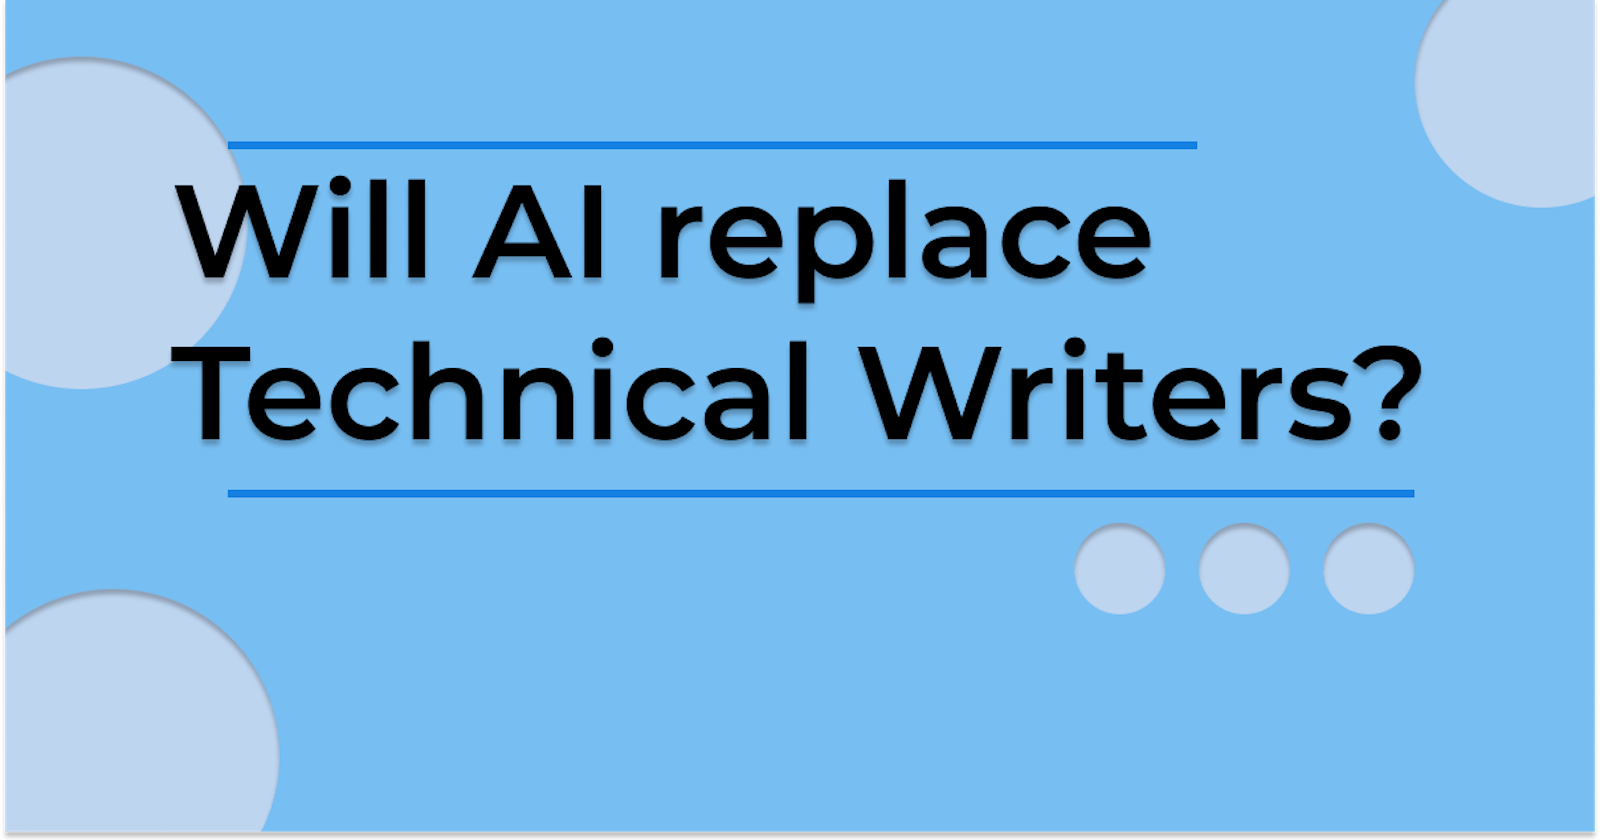 Will Technical Writers be replaced?